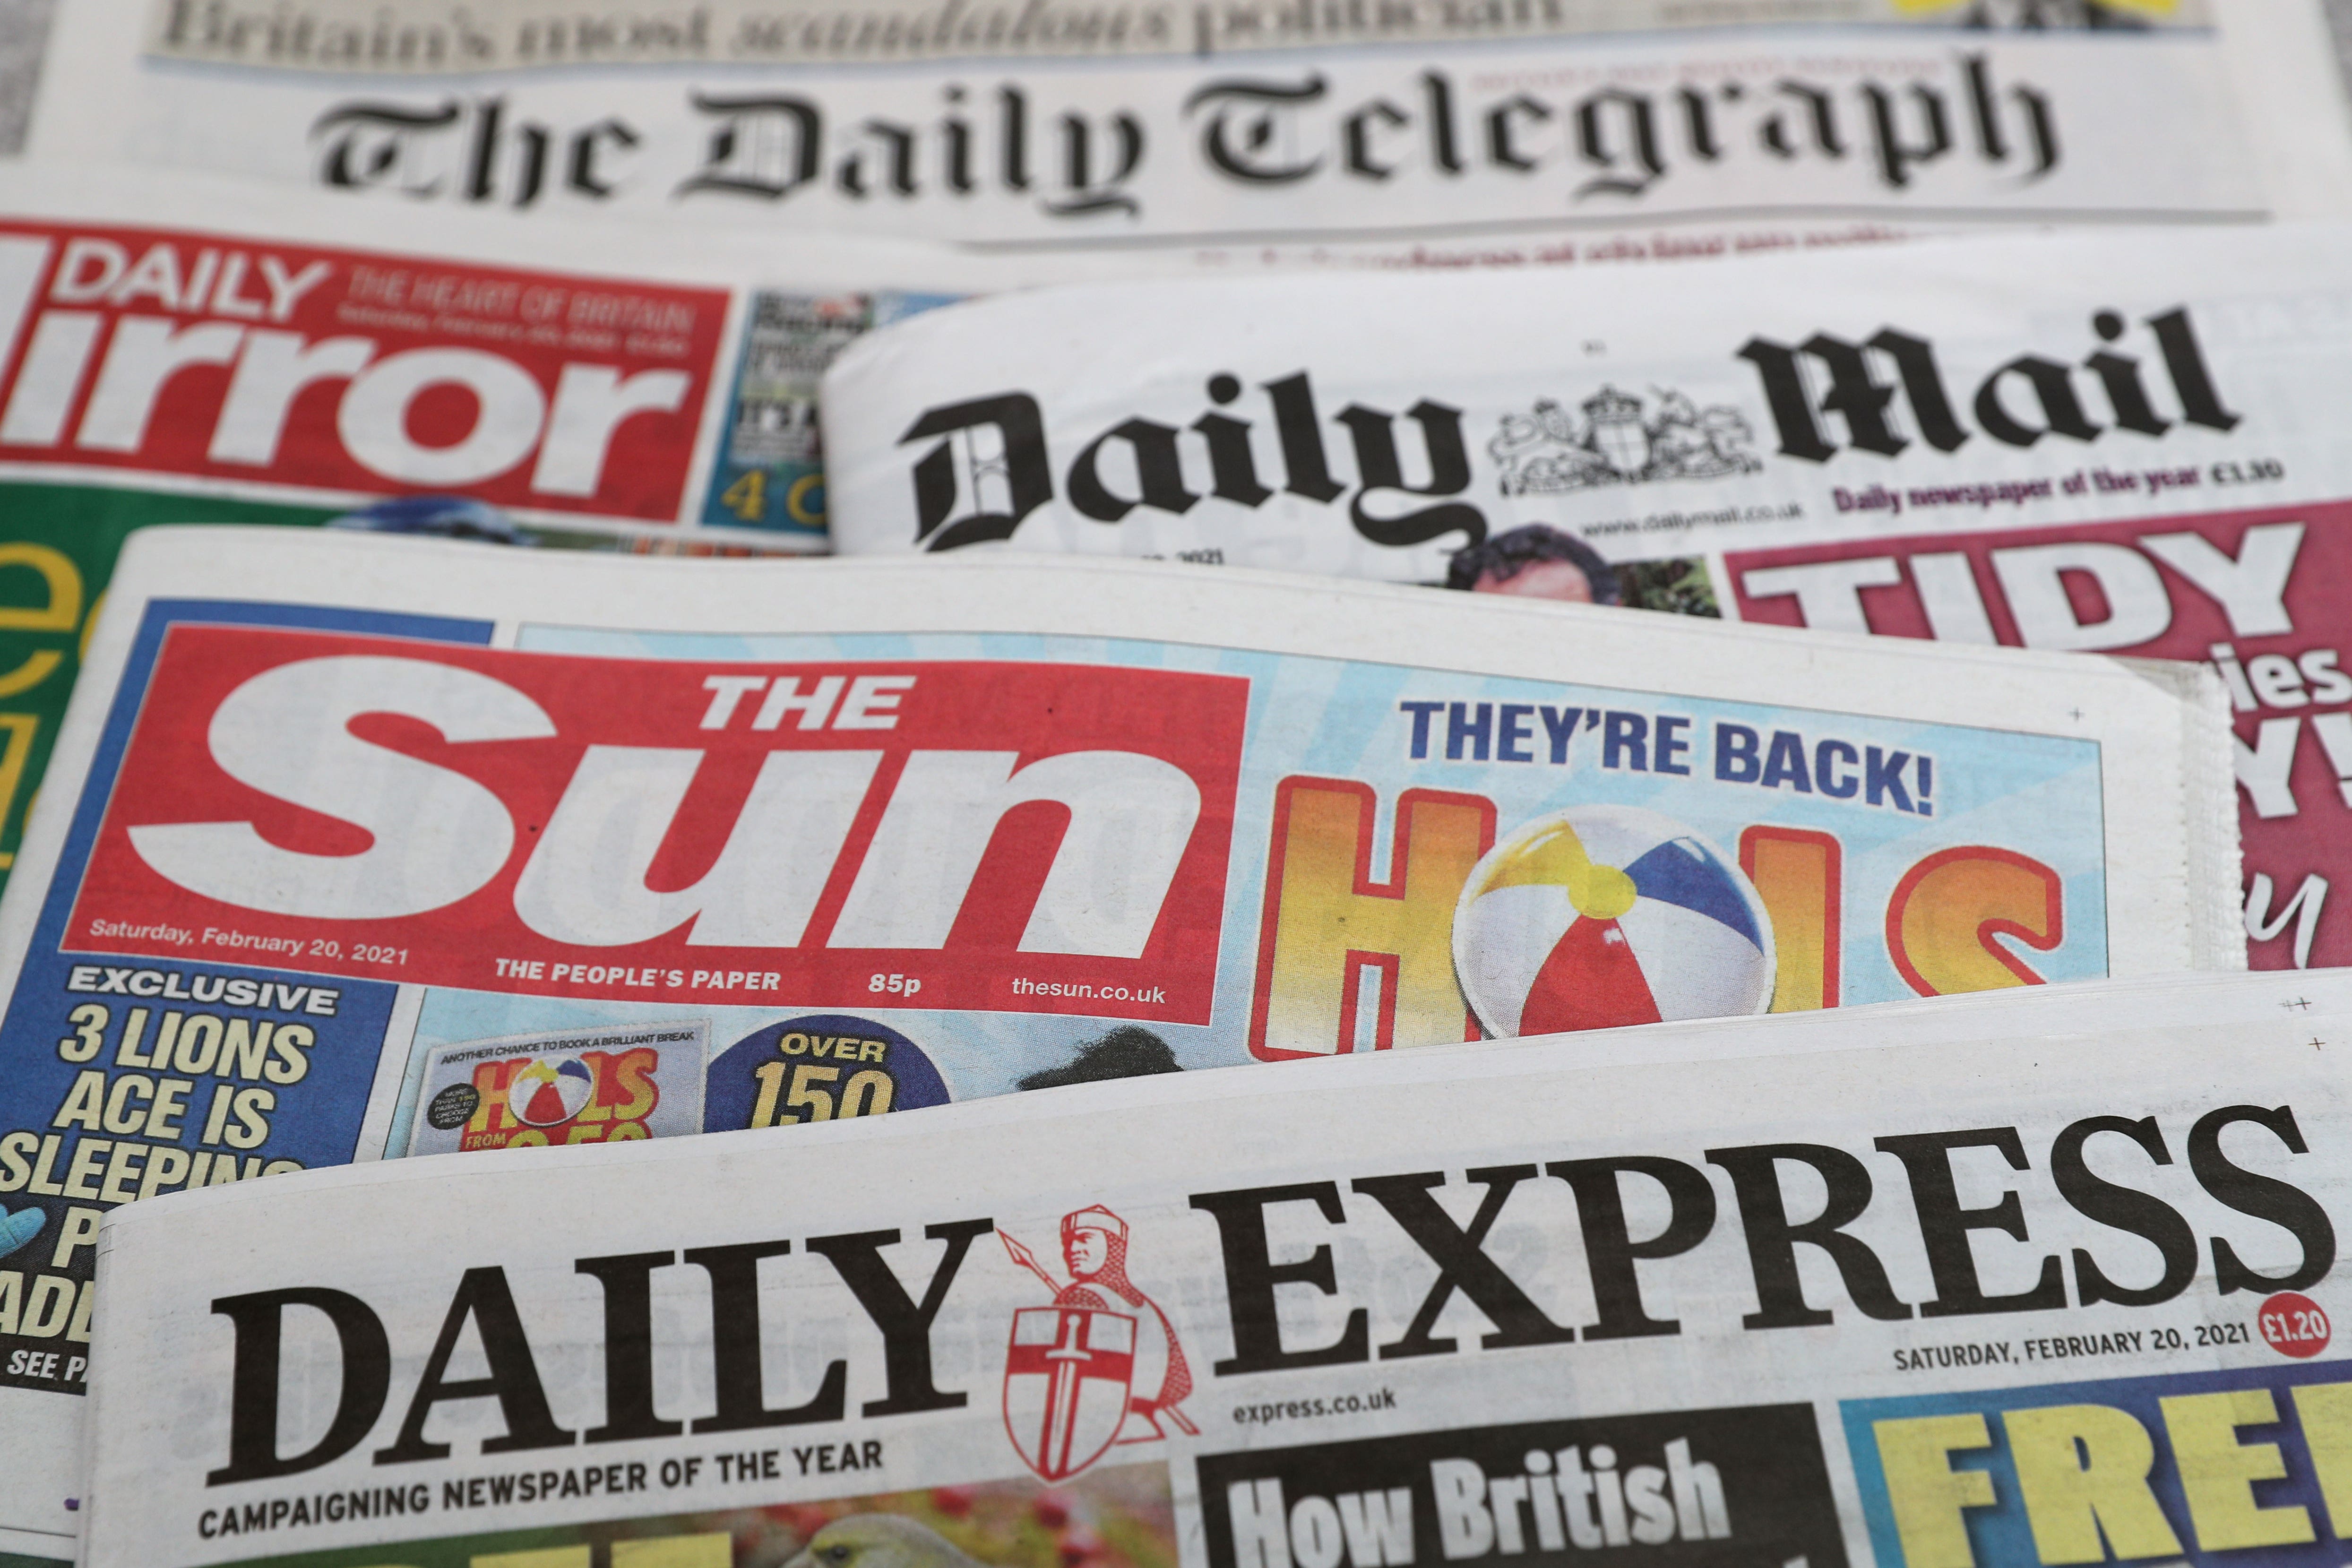 pa ready, daily mail, ipsos, british, tv news, bbc news, sky news, instagram, facebook, traditional media more trustworthy for science news, poll suggests